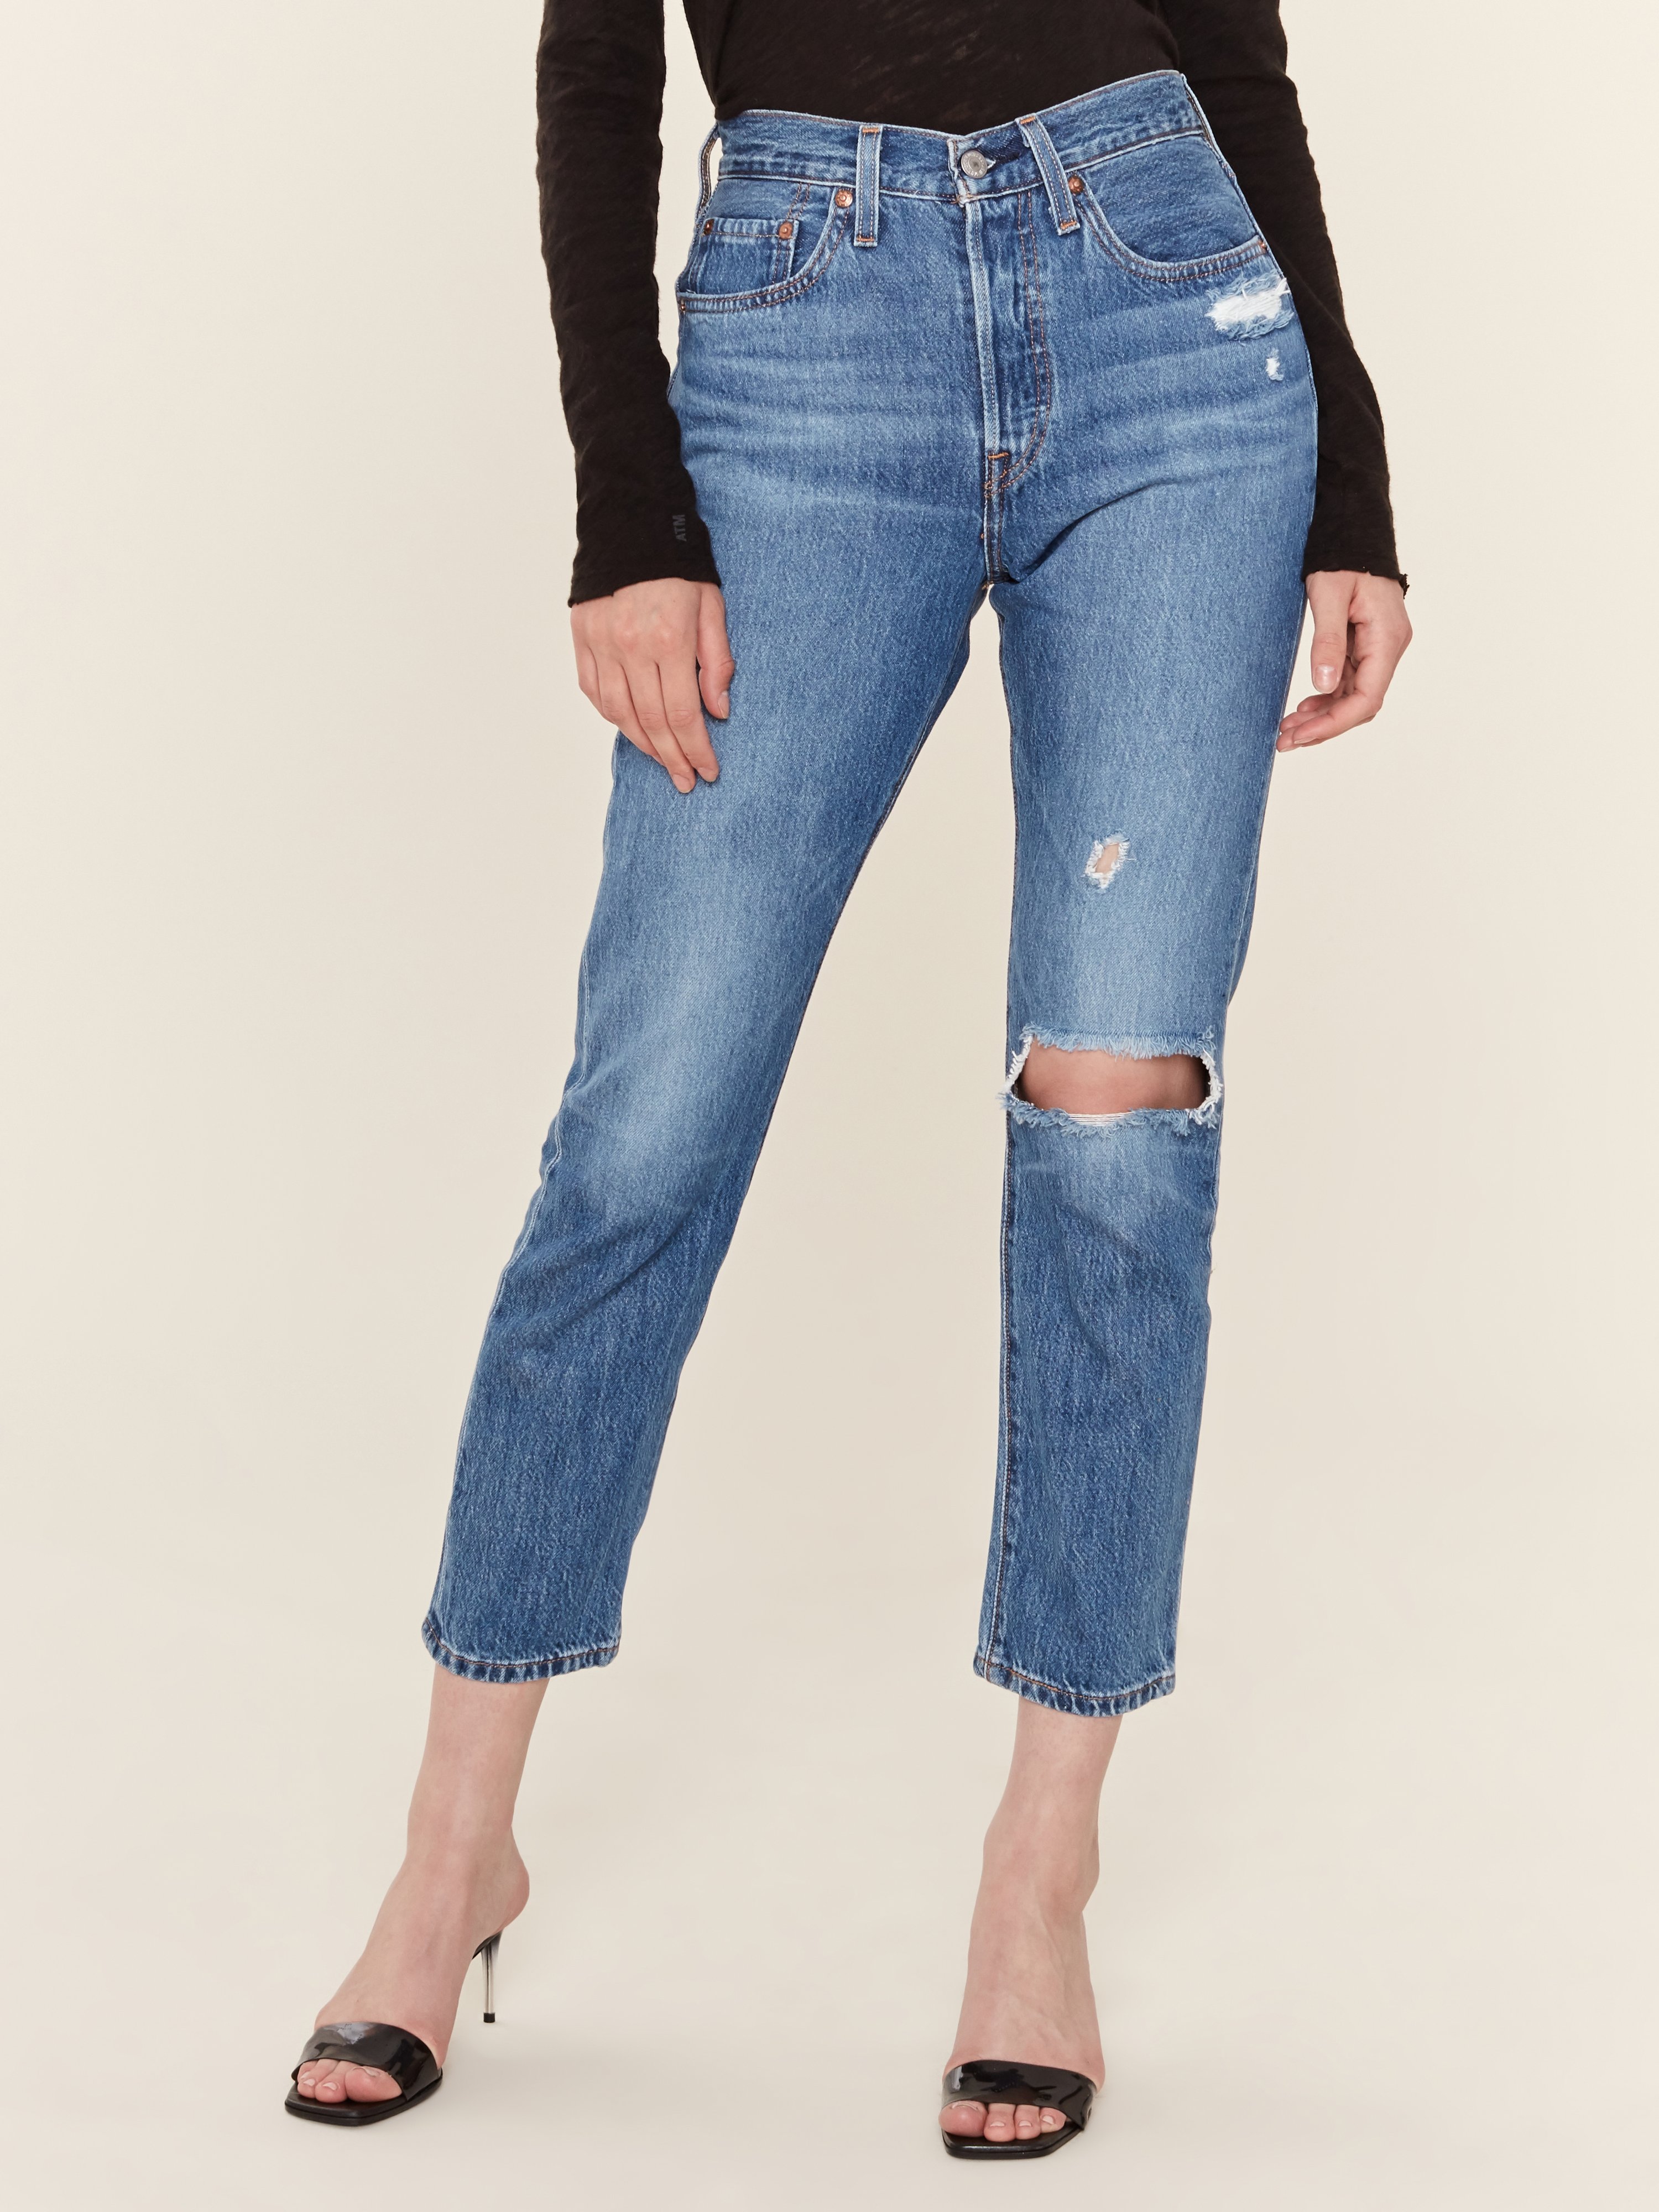 Levi's 501 Distressed High Rise Cropped Skinny Jeans In Sansome Street